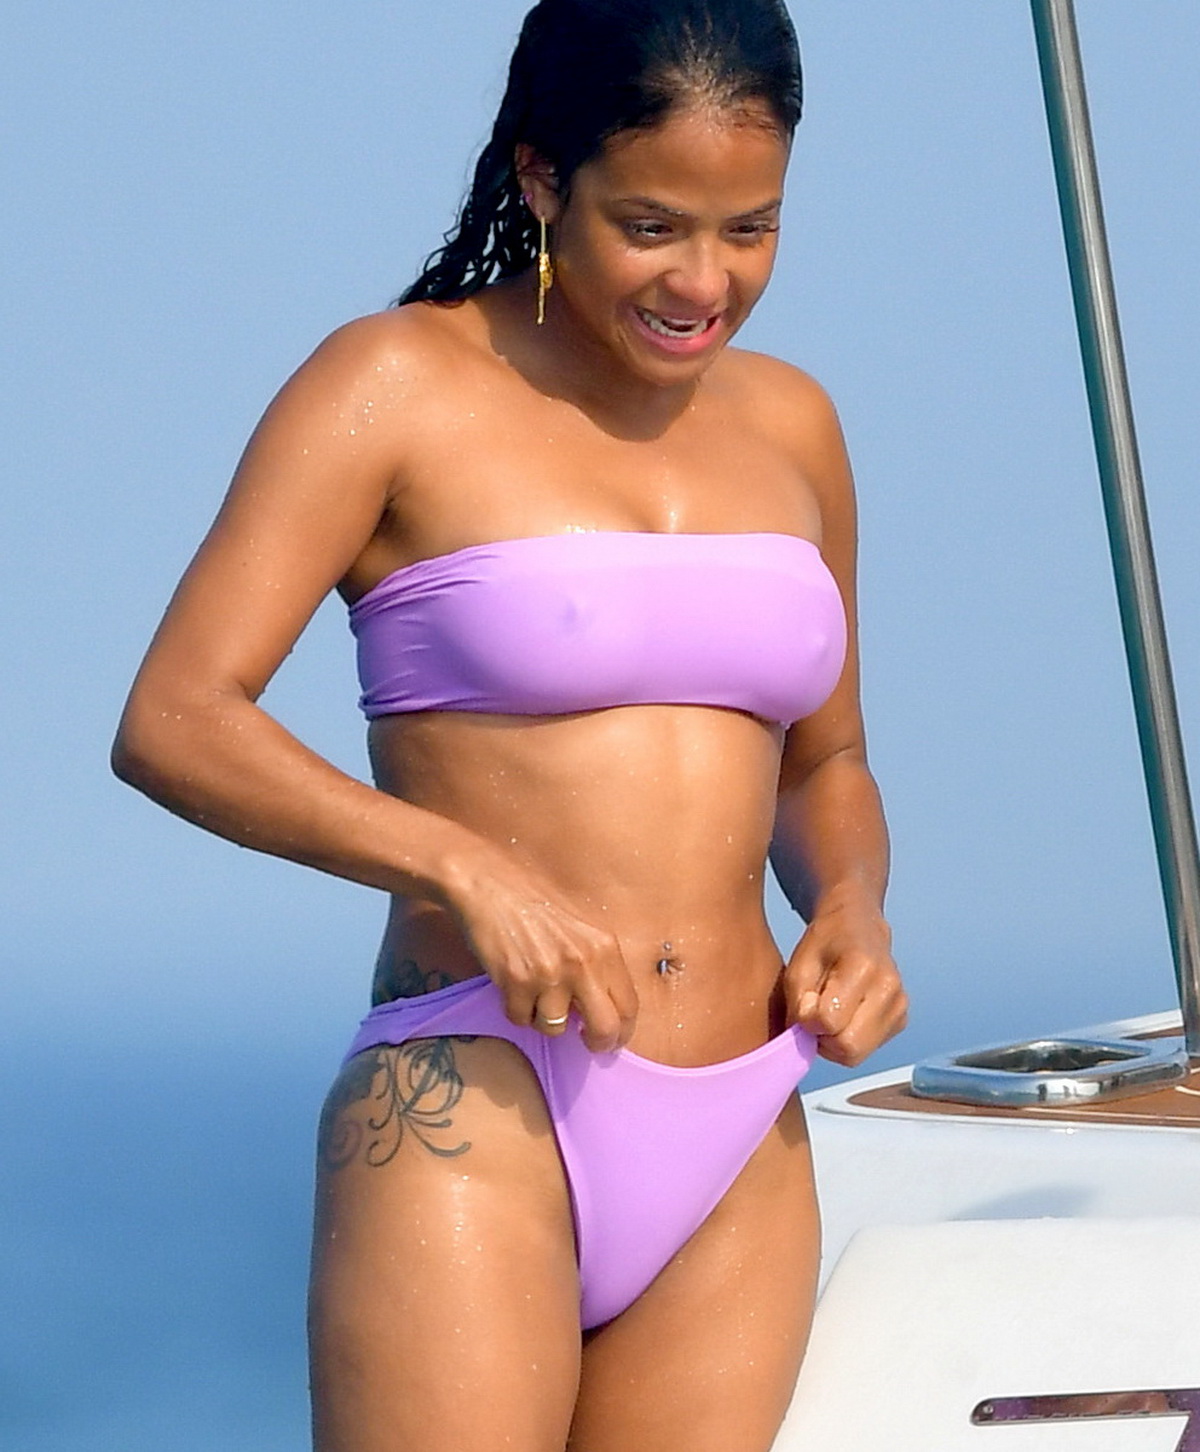 Christina Milian pokies and cameltoe in sexy bikini candids on a boat during holiday UHQ (5).jpg